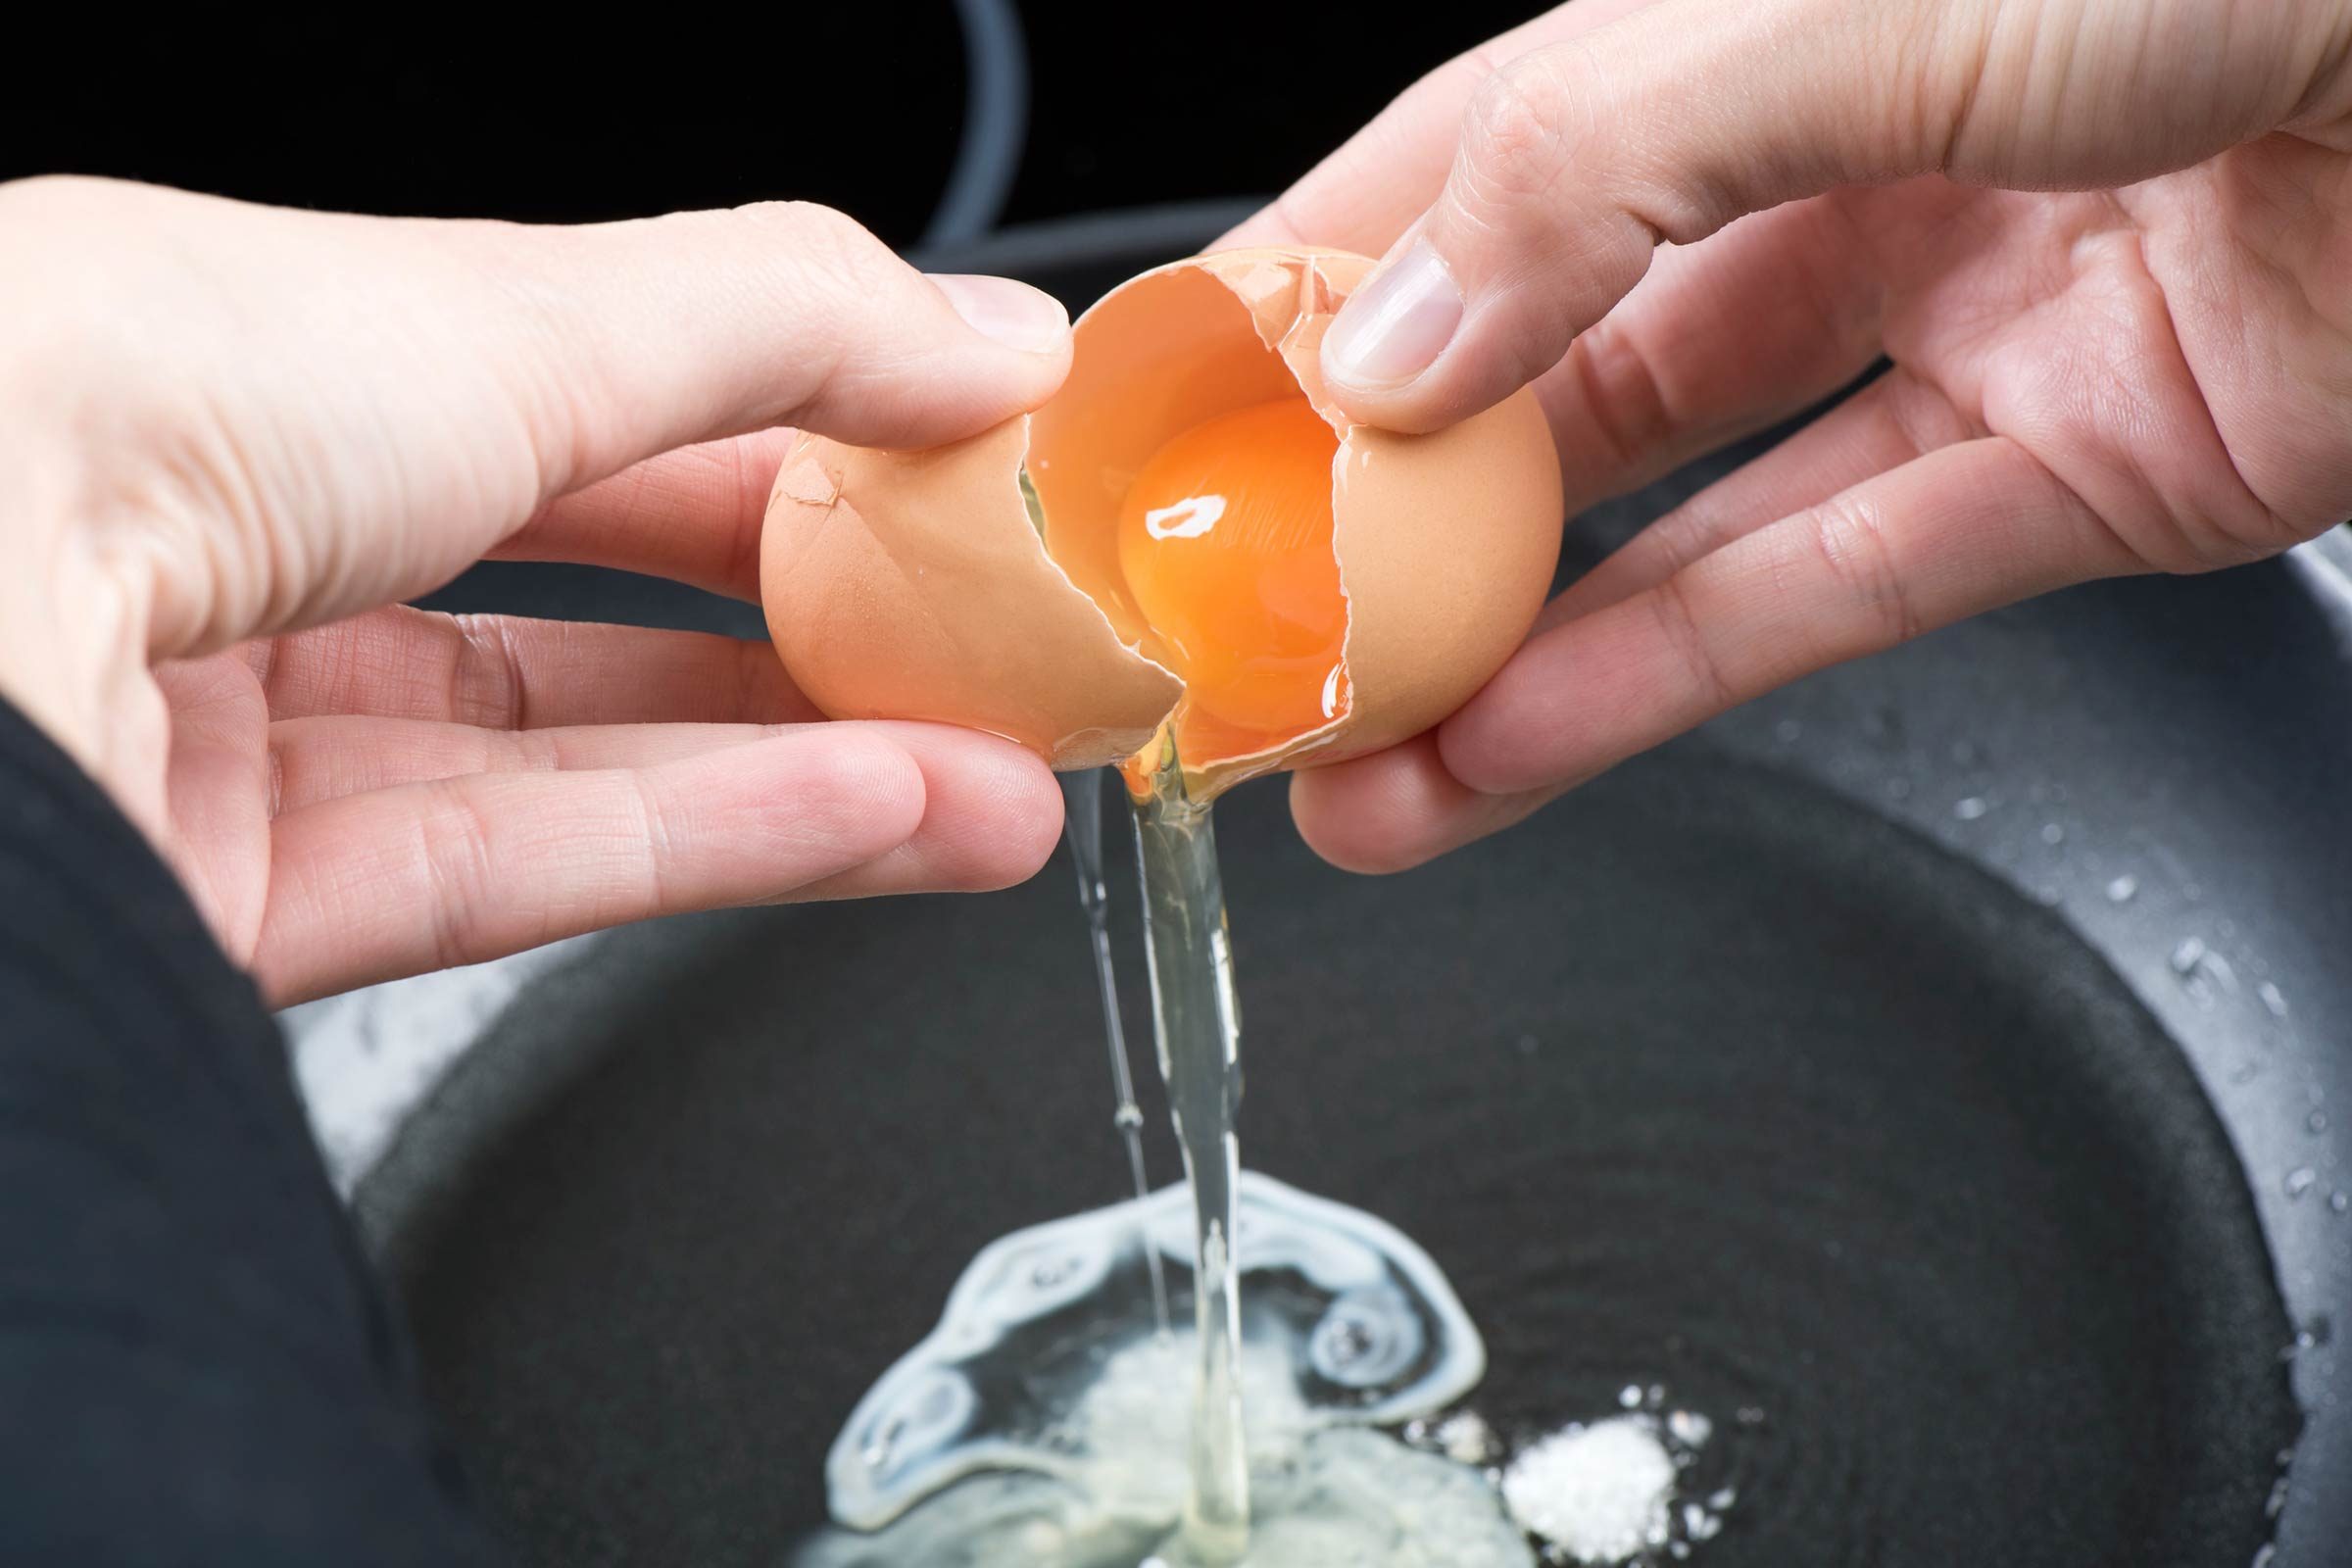 You eat egg whites instead of whole eggs